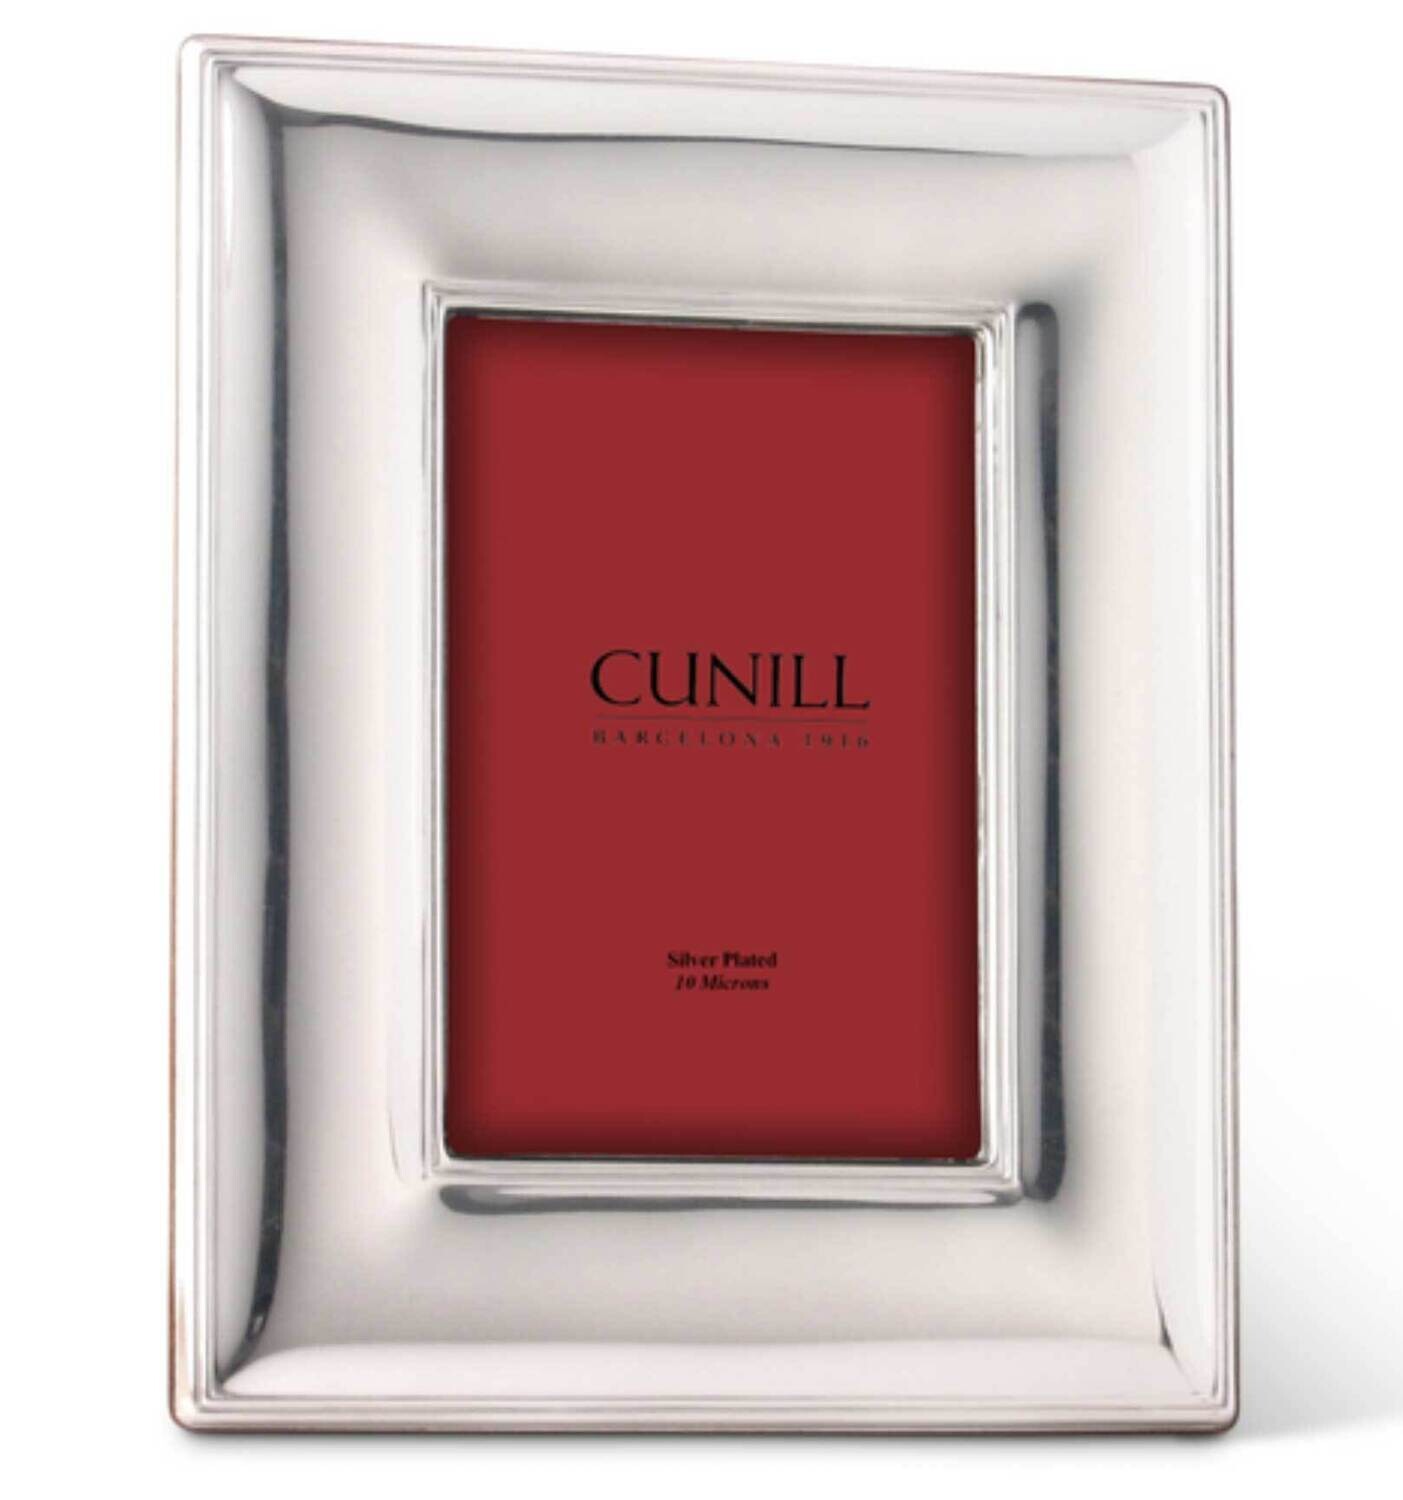 Cunill London 4x6 Inch Picture Frame Silverplated 20946